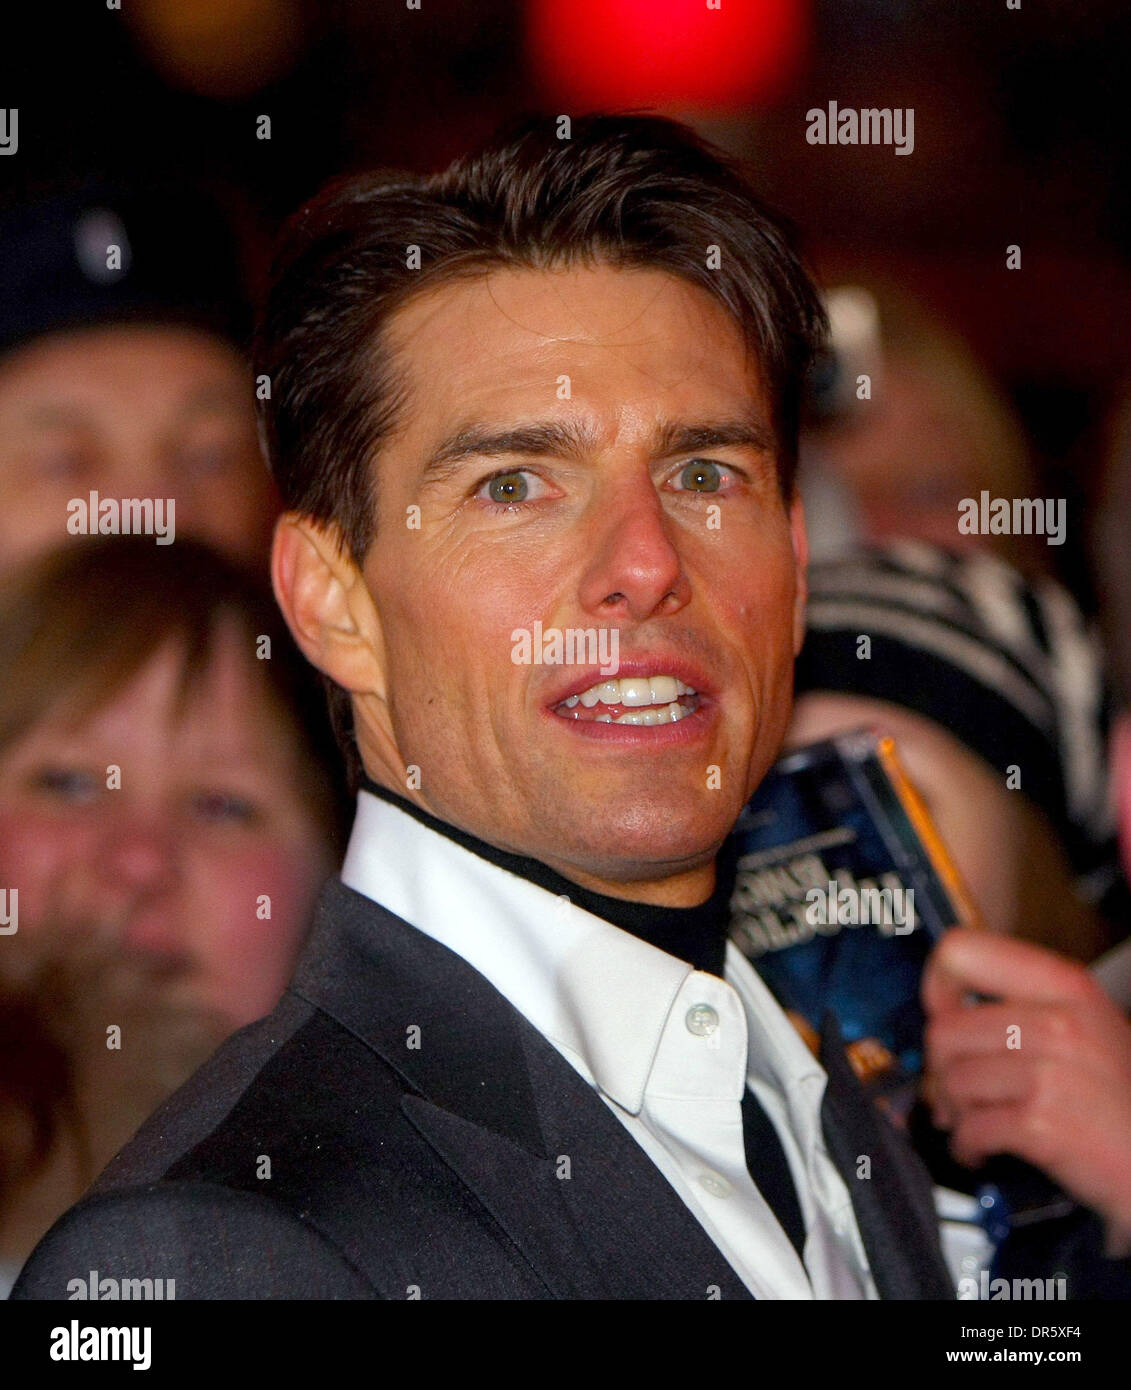 Jan 26, 2009 - Moscow, Russia - Actor TOM CRUISE attends the 'Valkyrie'  Moscow premiere at Pushkinsky cinema